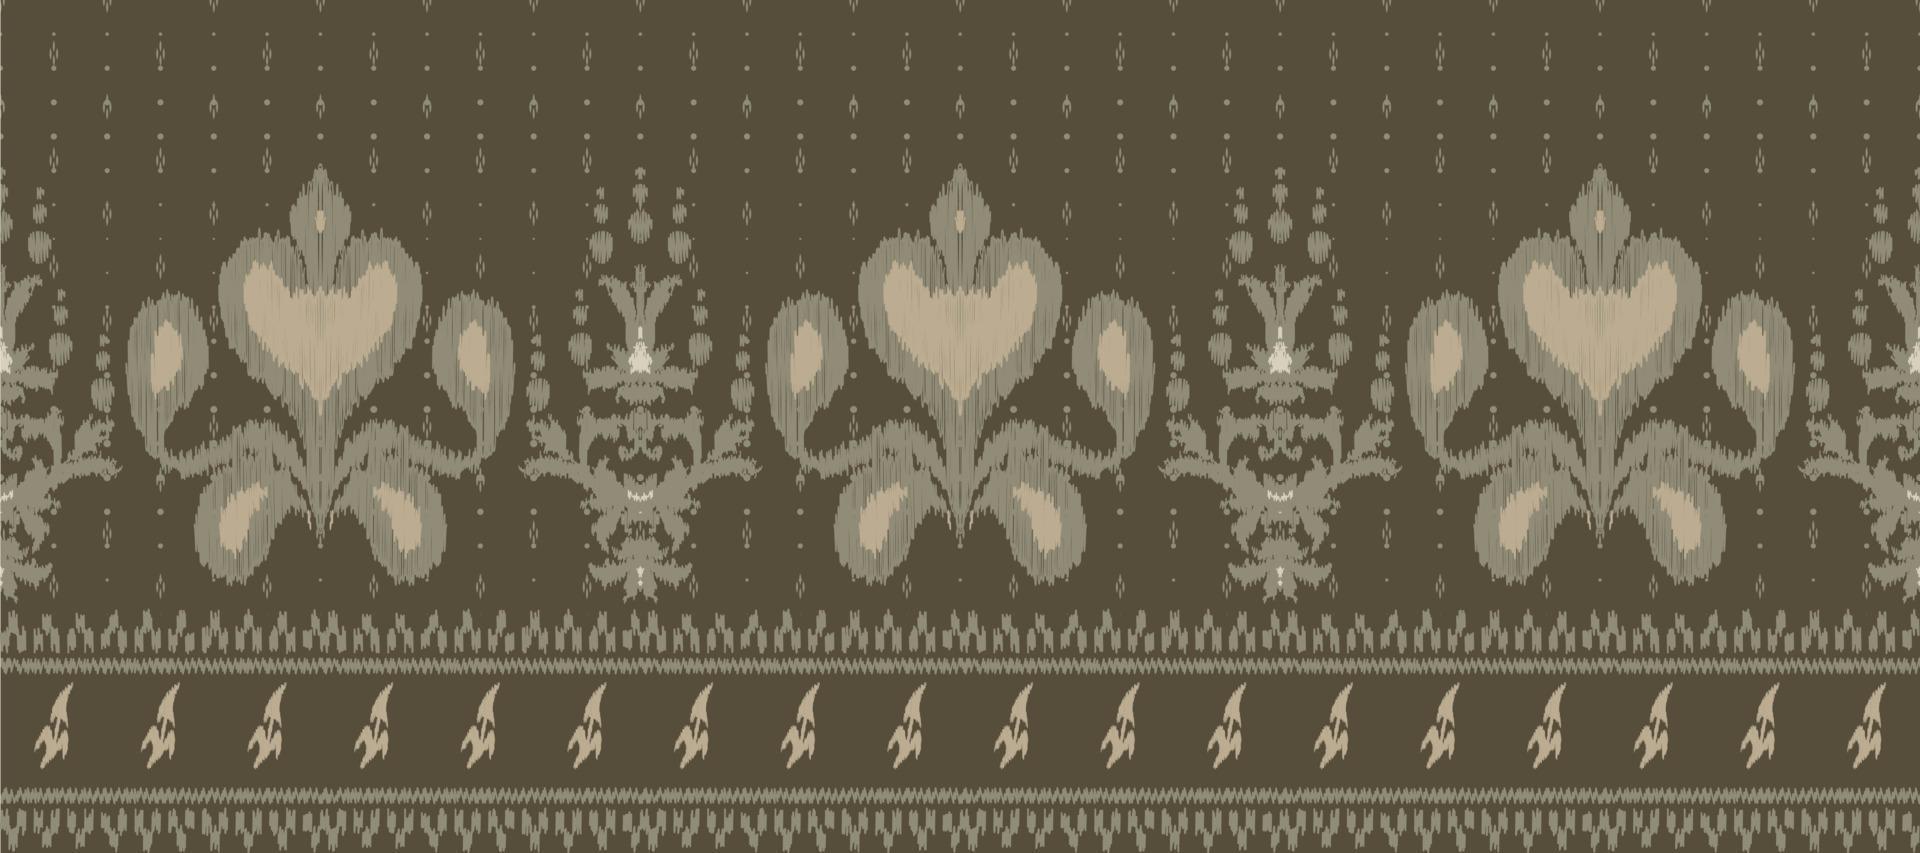 African Ikat Damask embroidery background. geometric ethnic oriental pattern traditional. Ikat Aztec style abstract vector illustration. design for print texture,fabric,saree,sari,carpet.